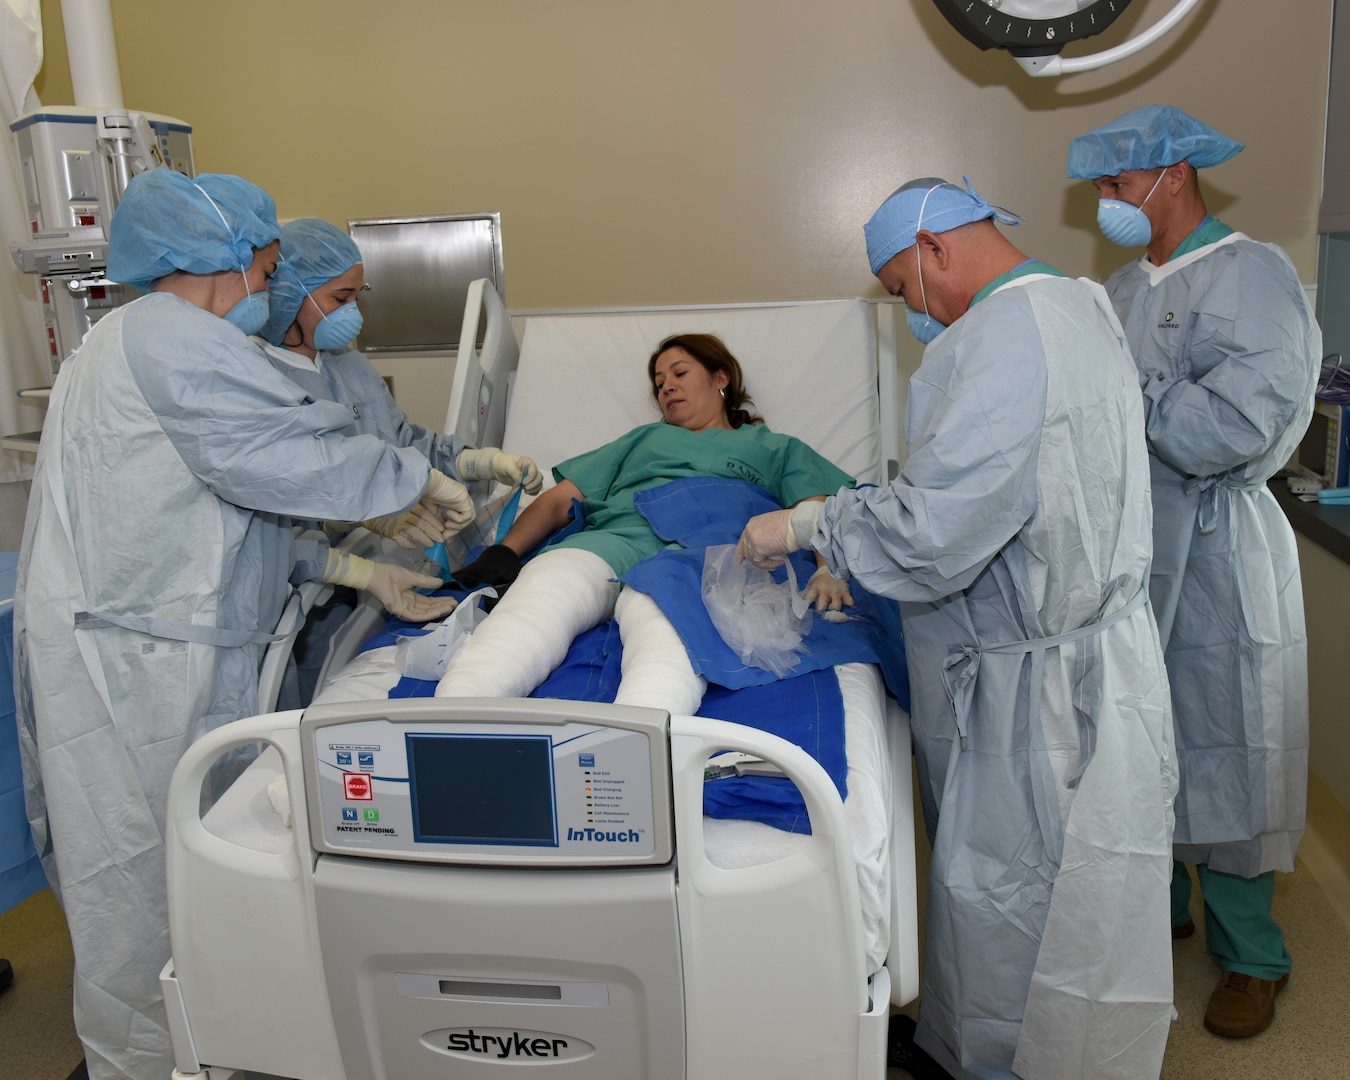 The nurses at the U.S. Army Institute of Surgical Research Burn Center Intensive Care Unit were divided into teams to perform specific simulated wound care techniques on a staff member from their group during a staff development day at Joint Base San Antonio-Fort Sam Houston Sept. 14.